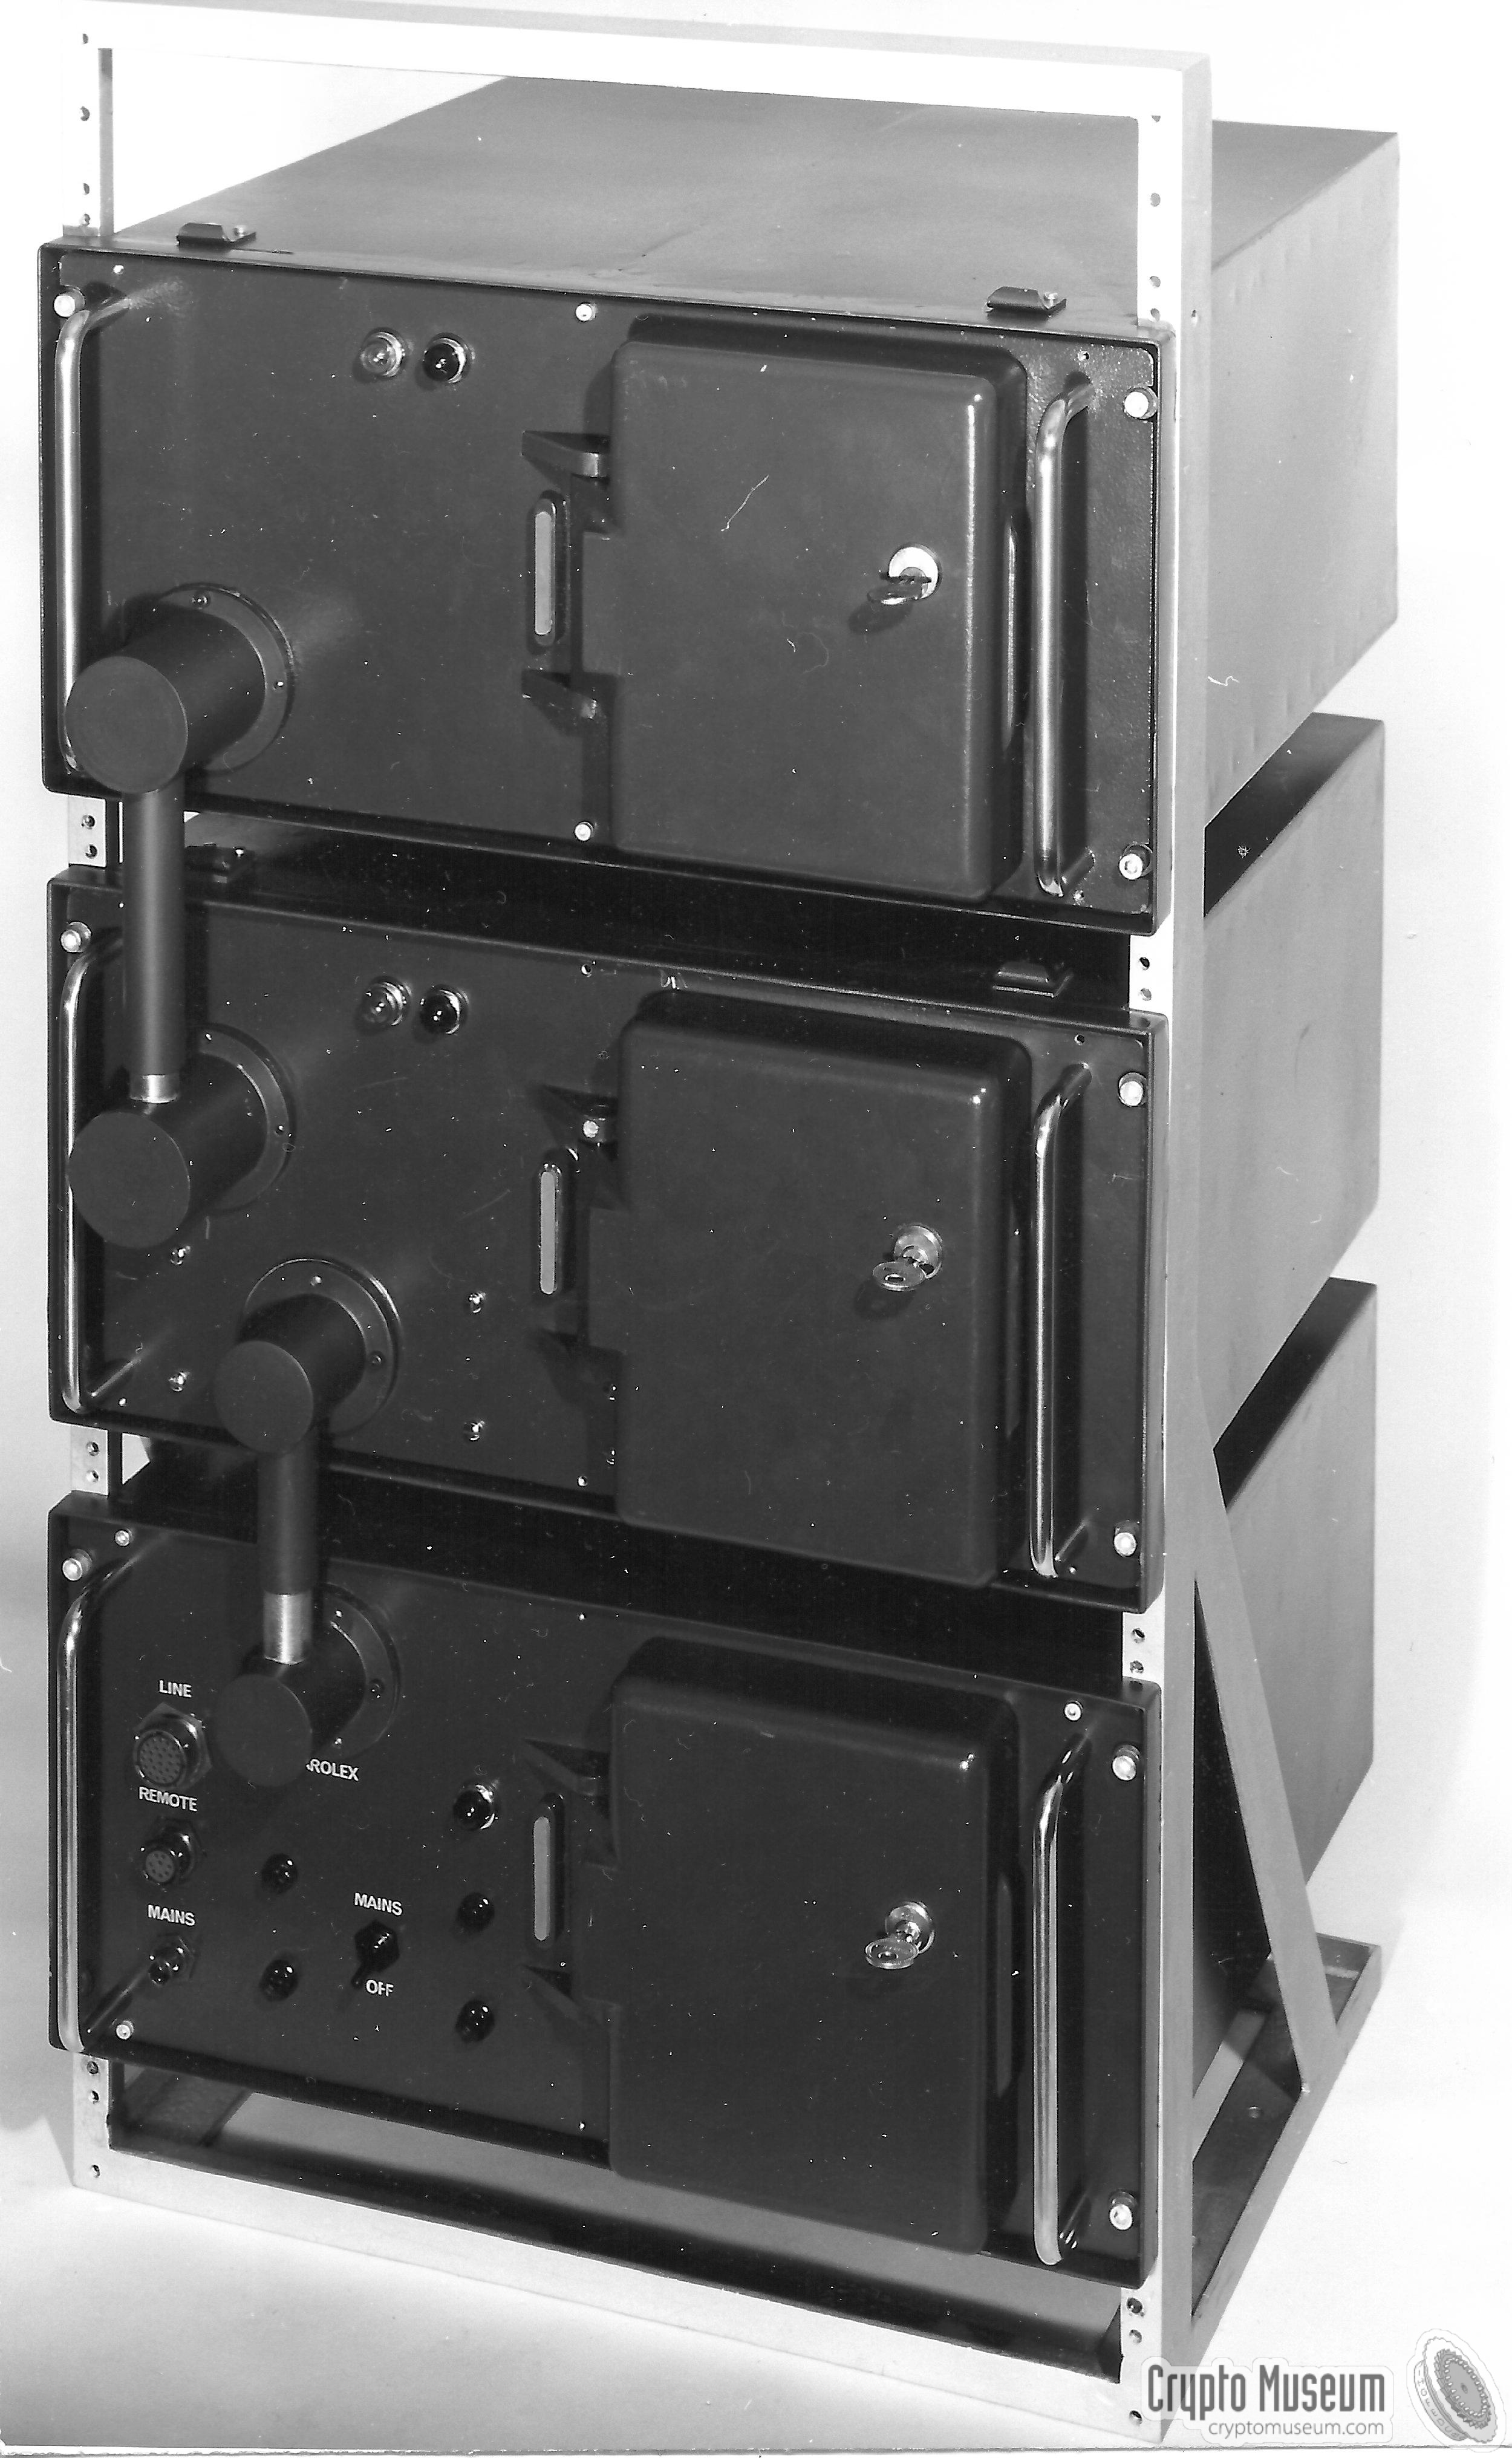 Unknown rack with serveral units, including a Tarolex. Prabably a test setup.